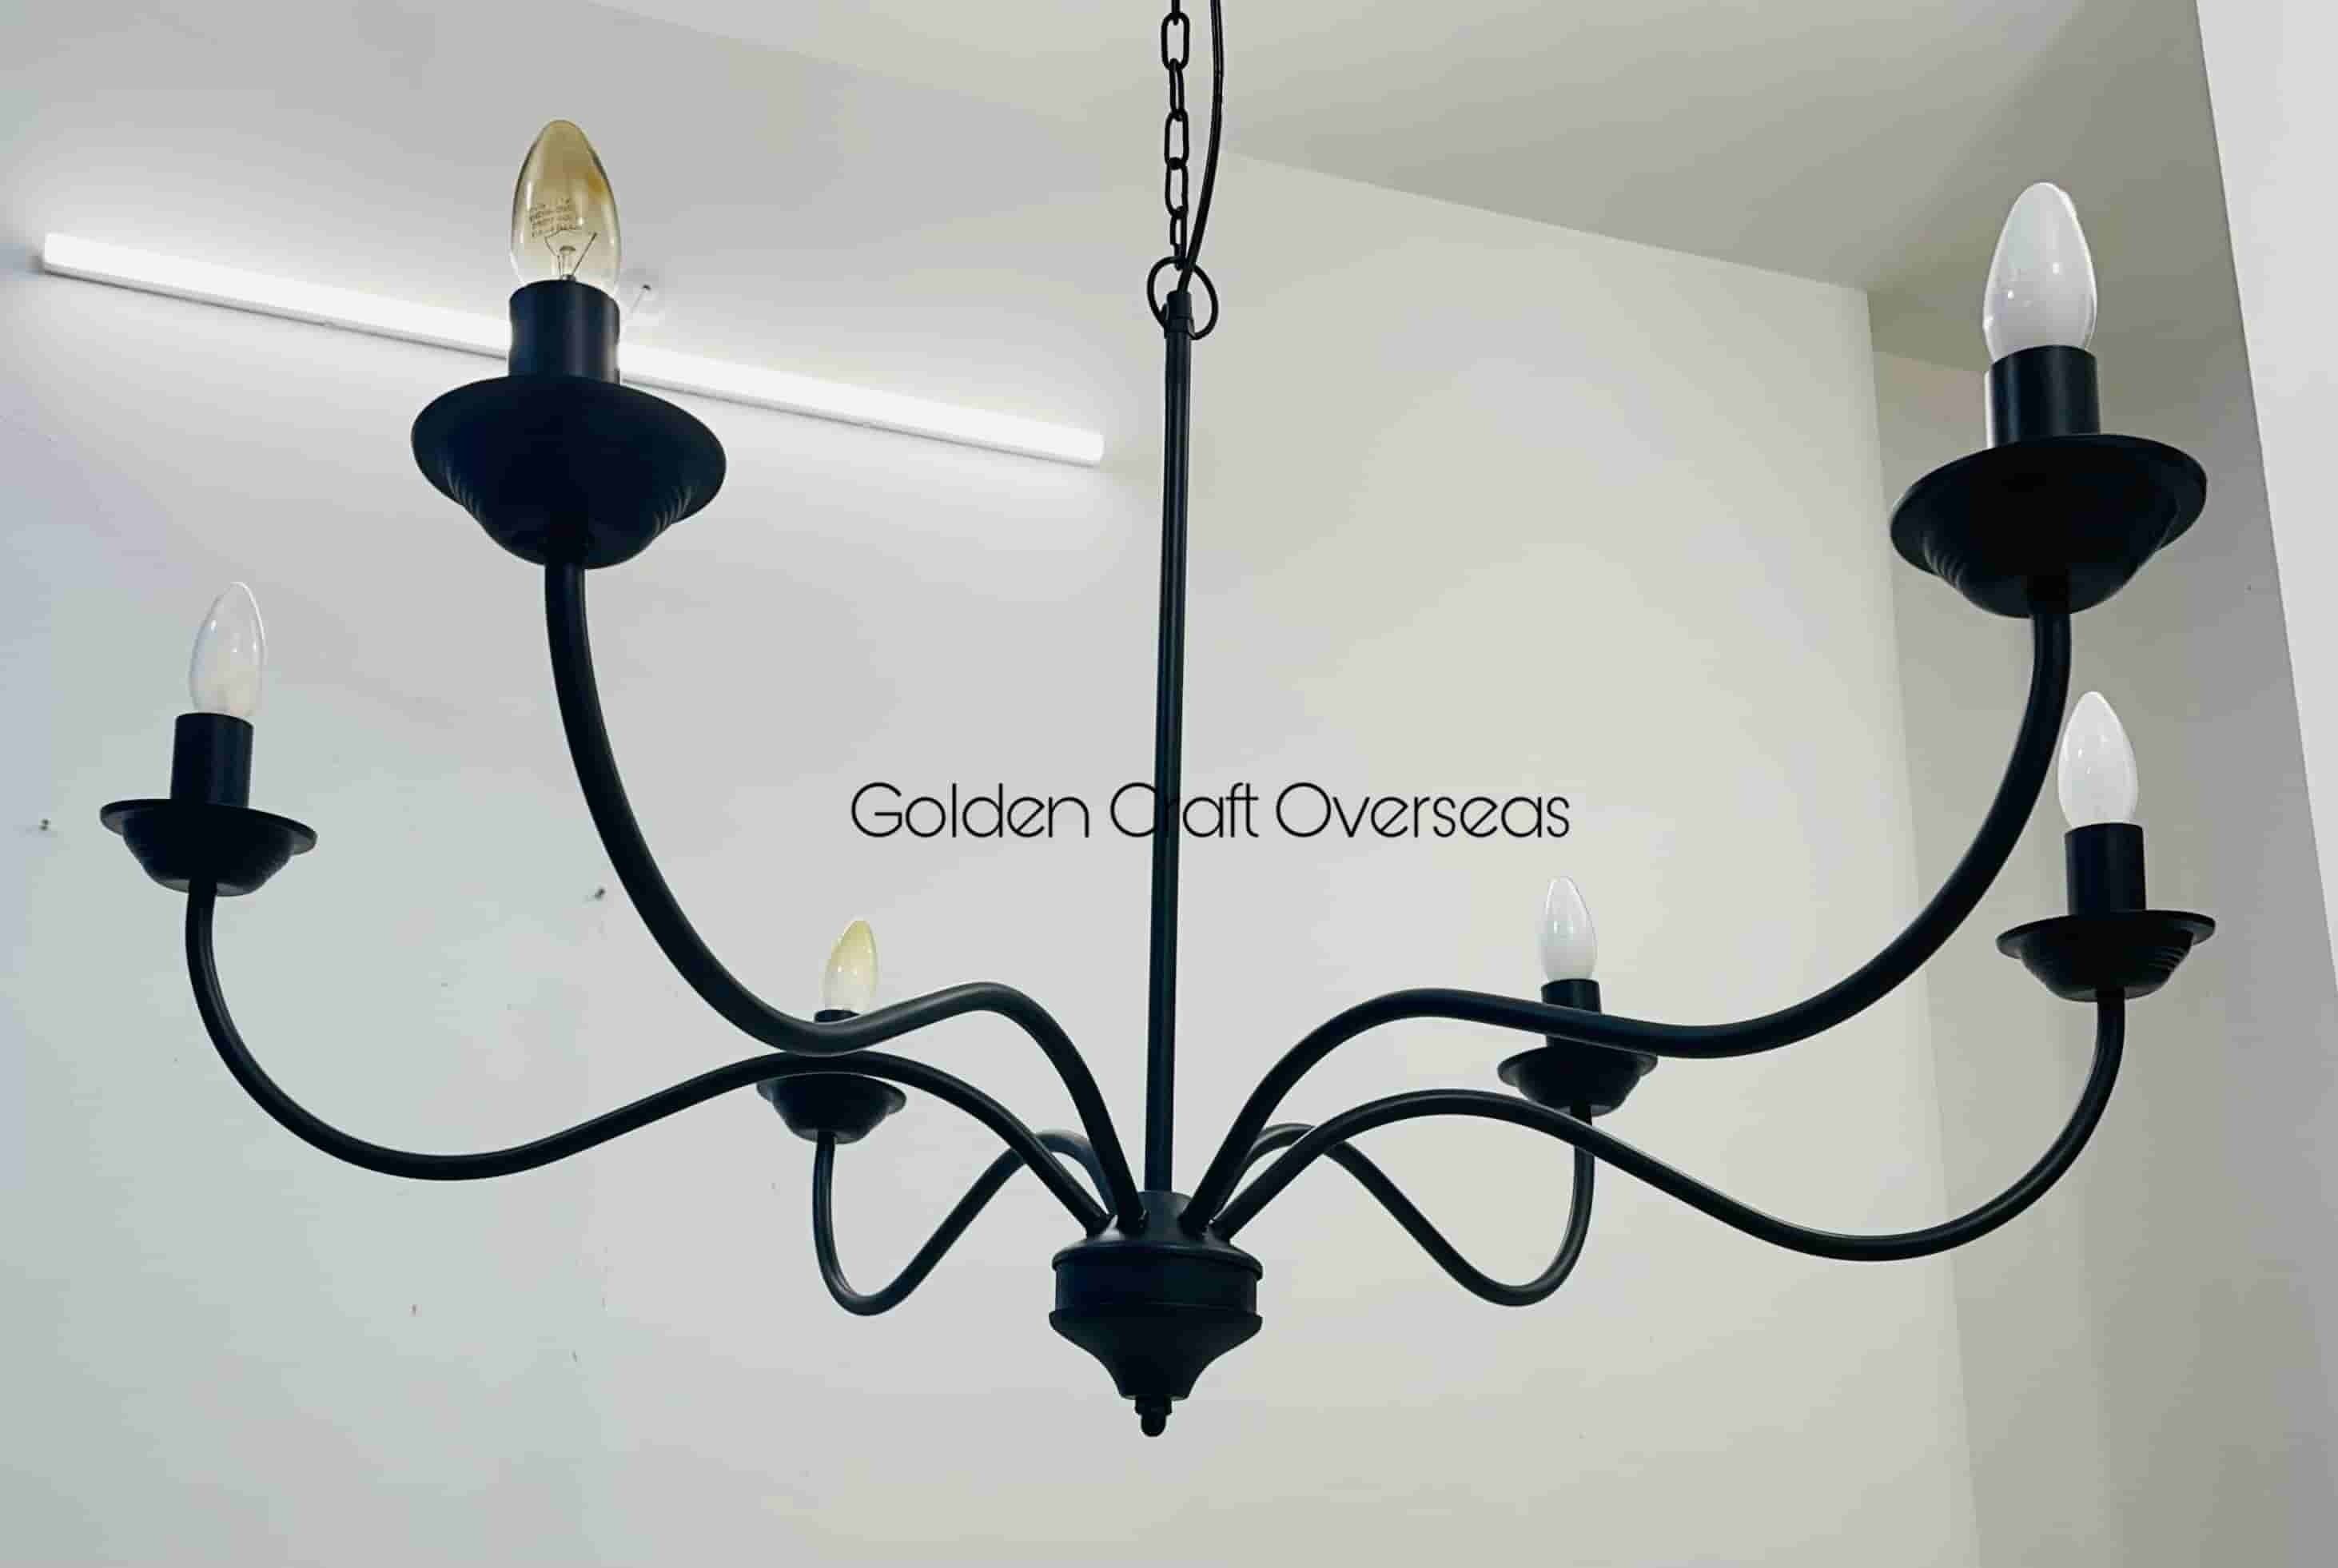 Matte Black Iron CHandelier with six arms holder fitting indoor lighting